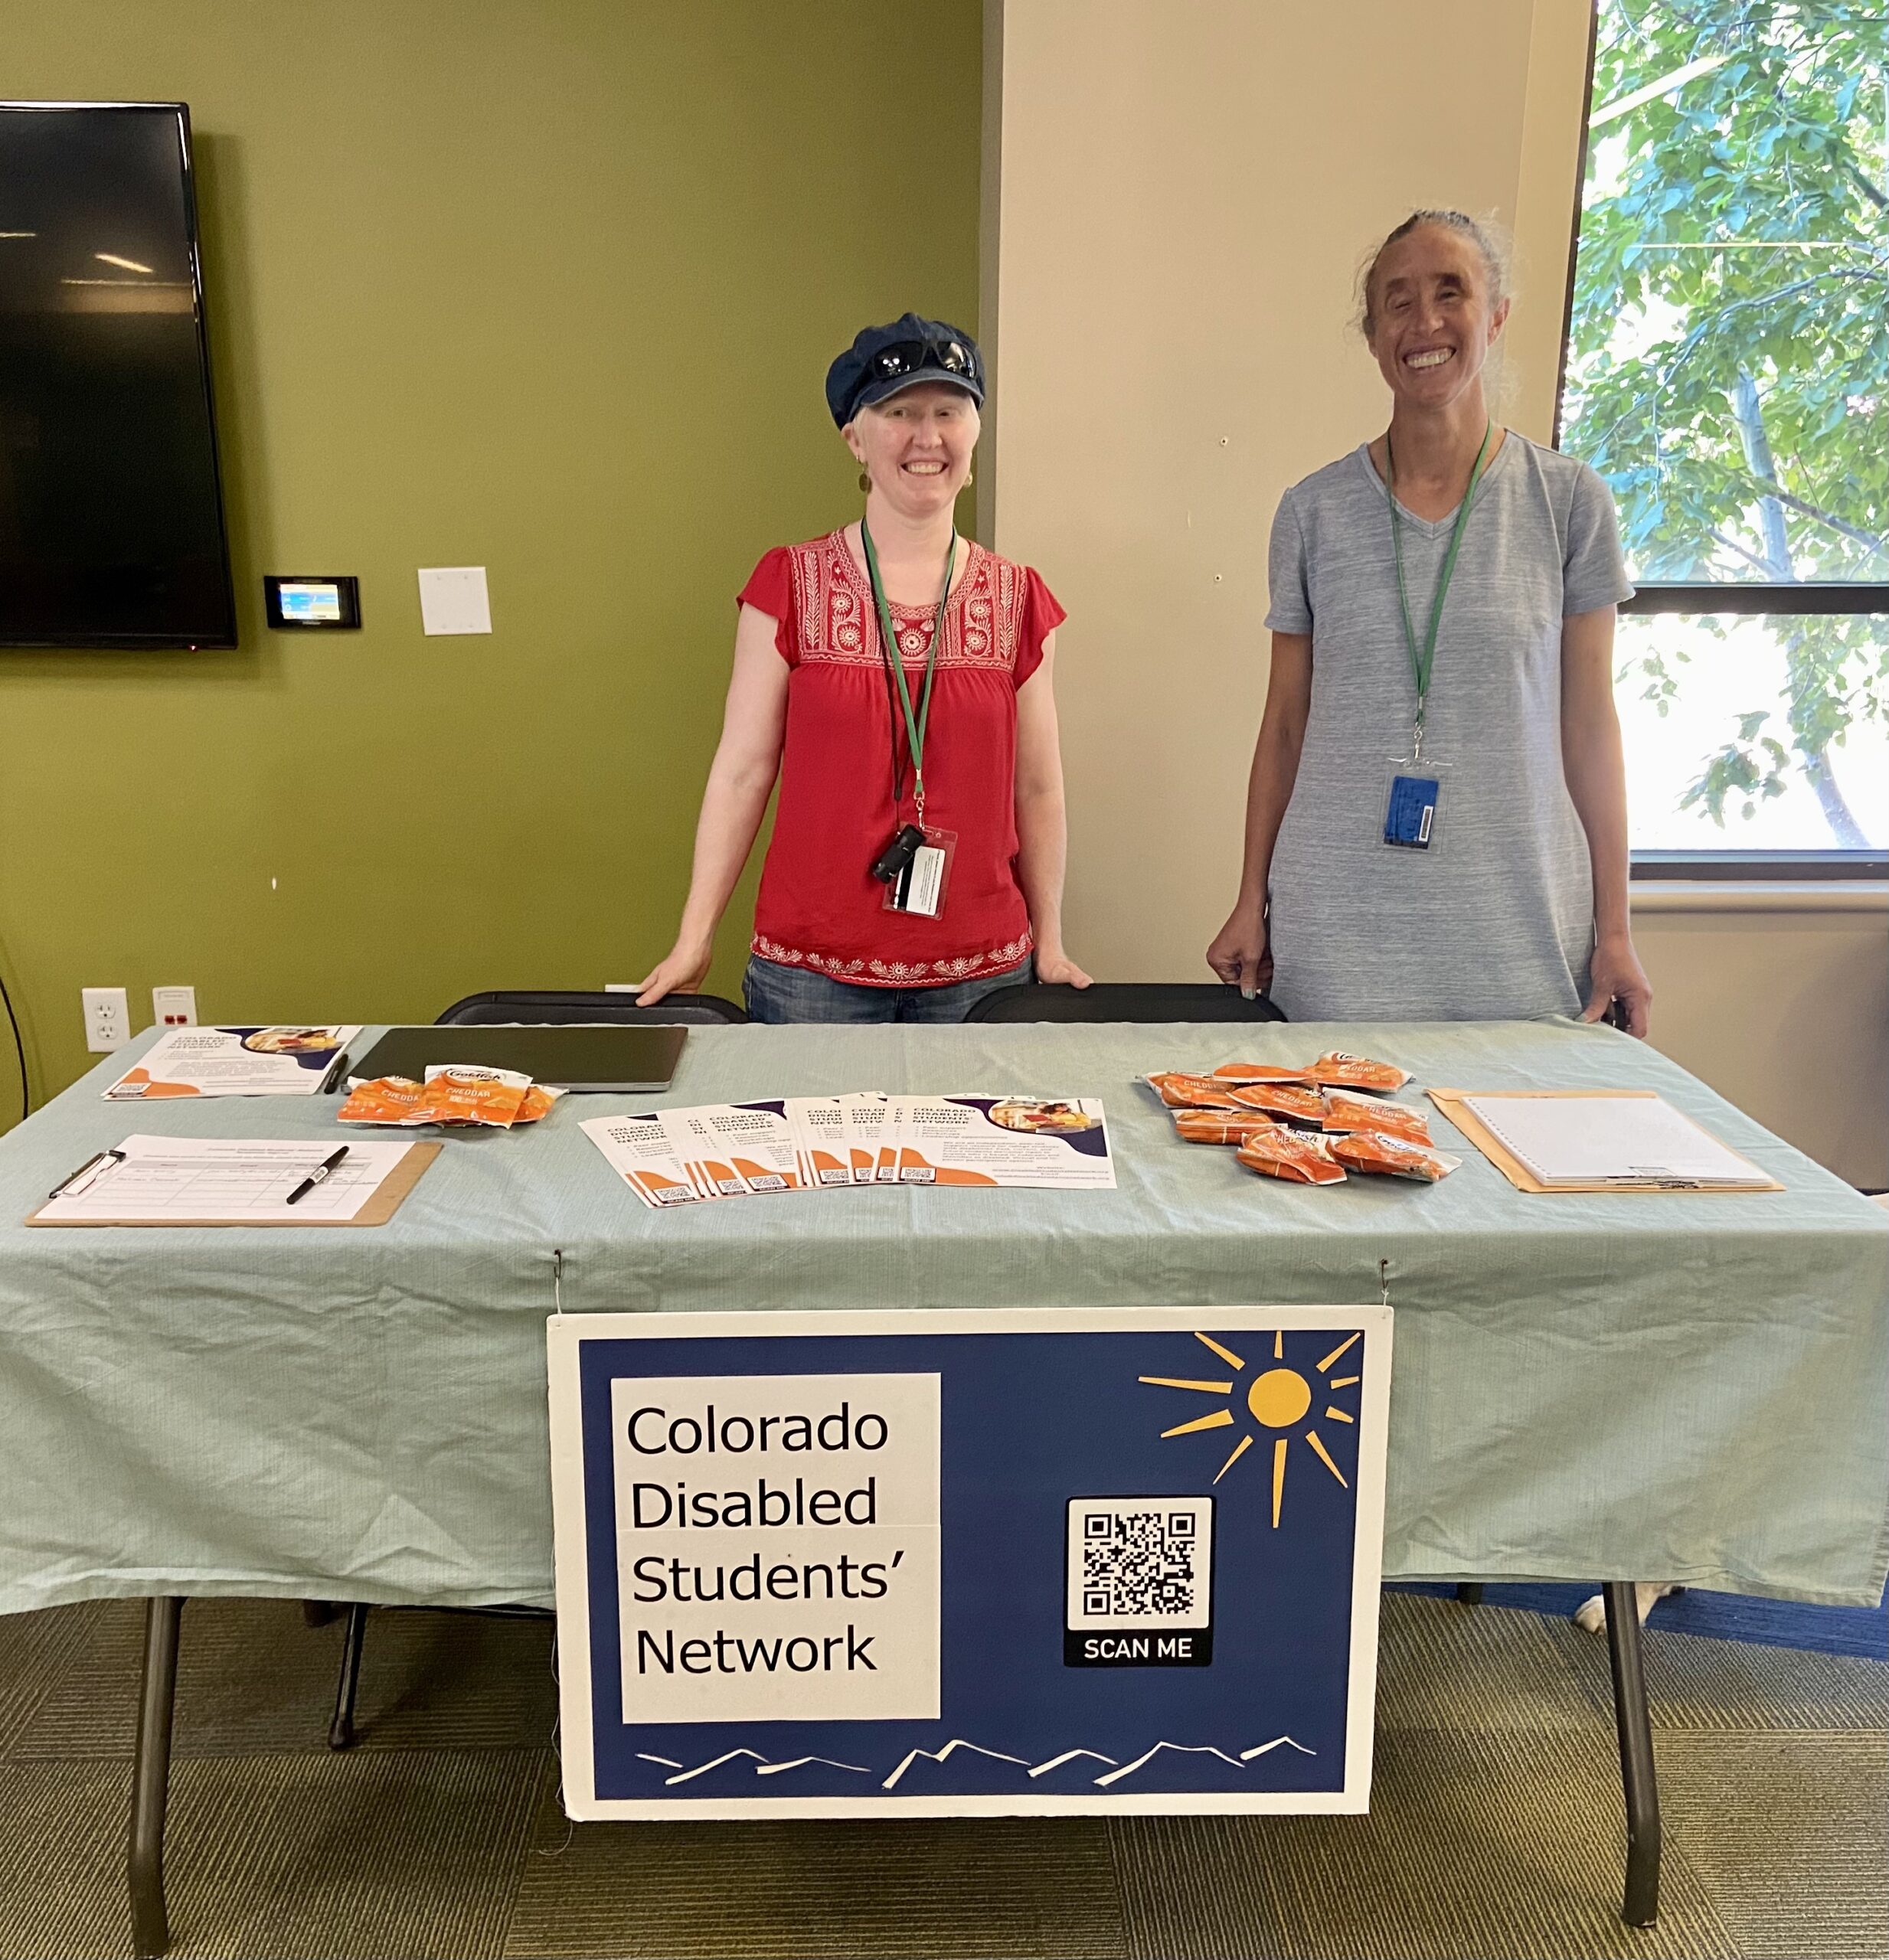 Anna and Amelia standing behind a table with flyers, snacks, and a poster board sign that says Colorado Disabled Students' Network.